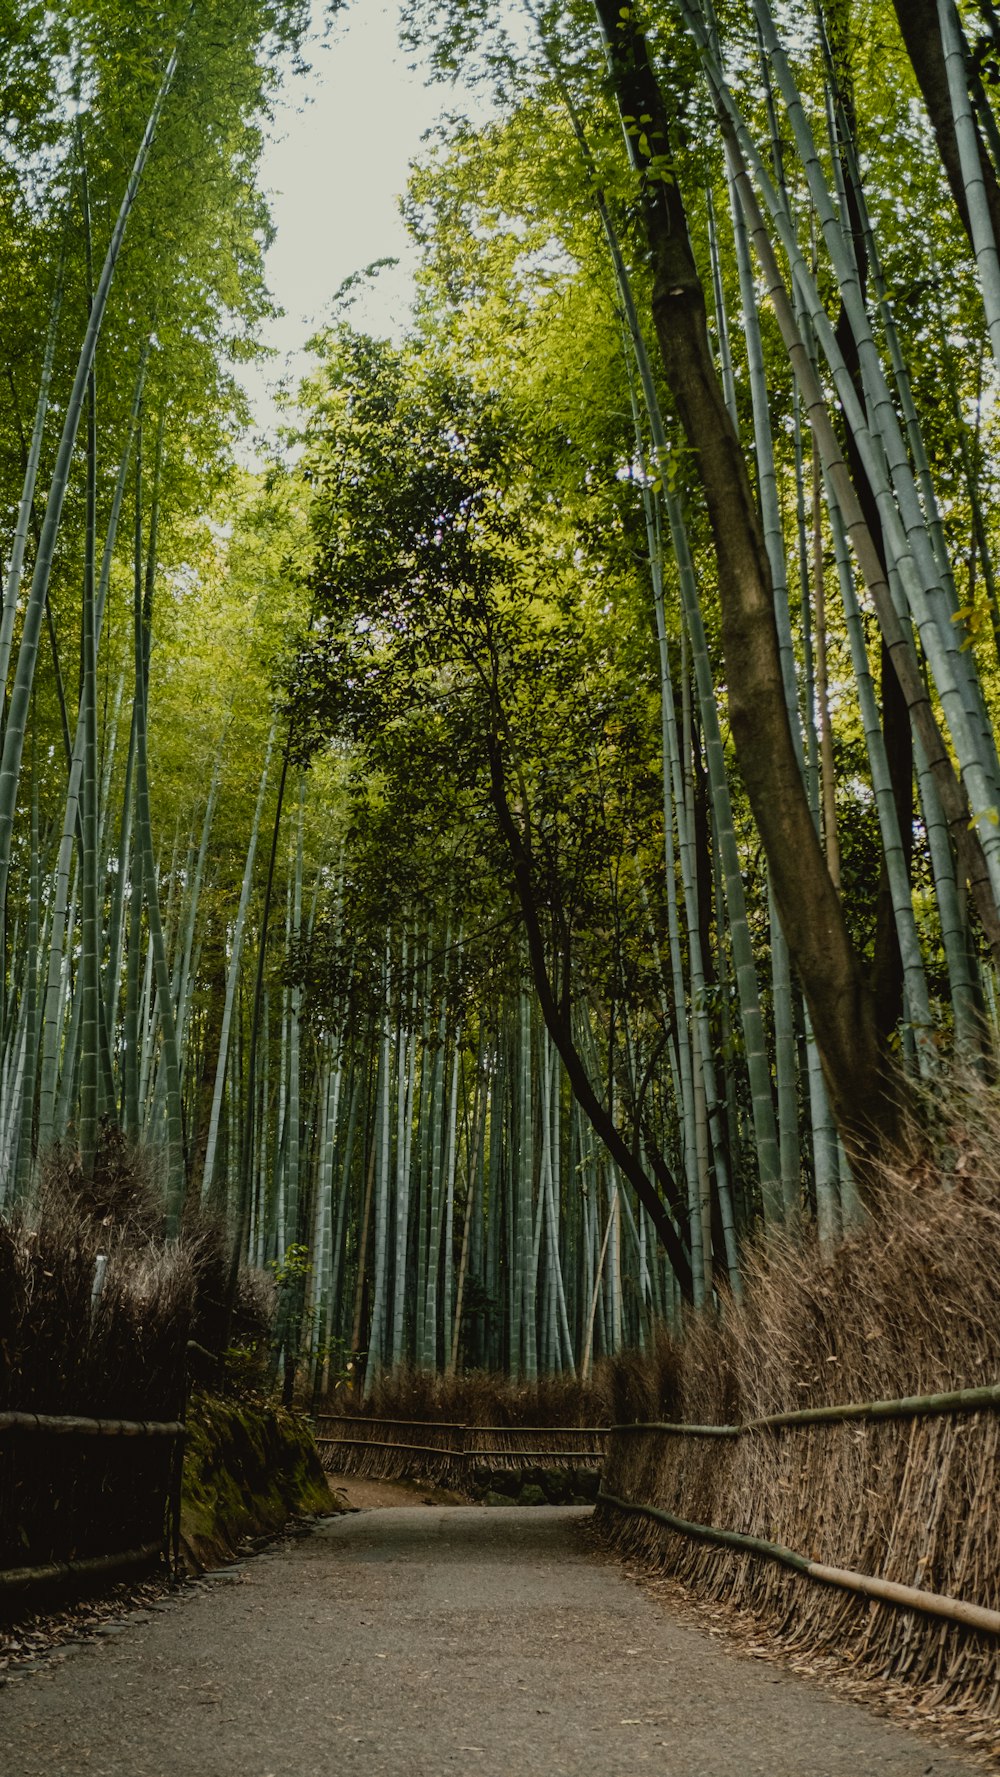 a path through a bamboo forest with lots of tall trees